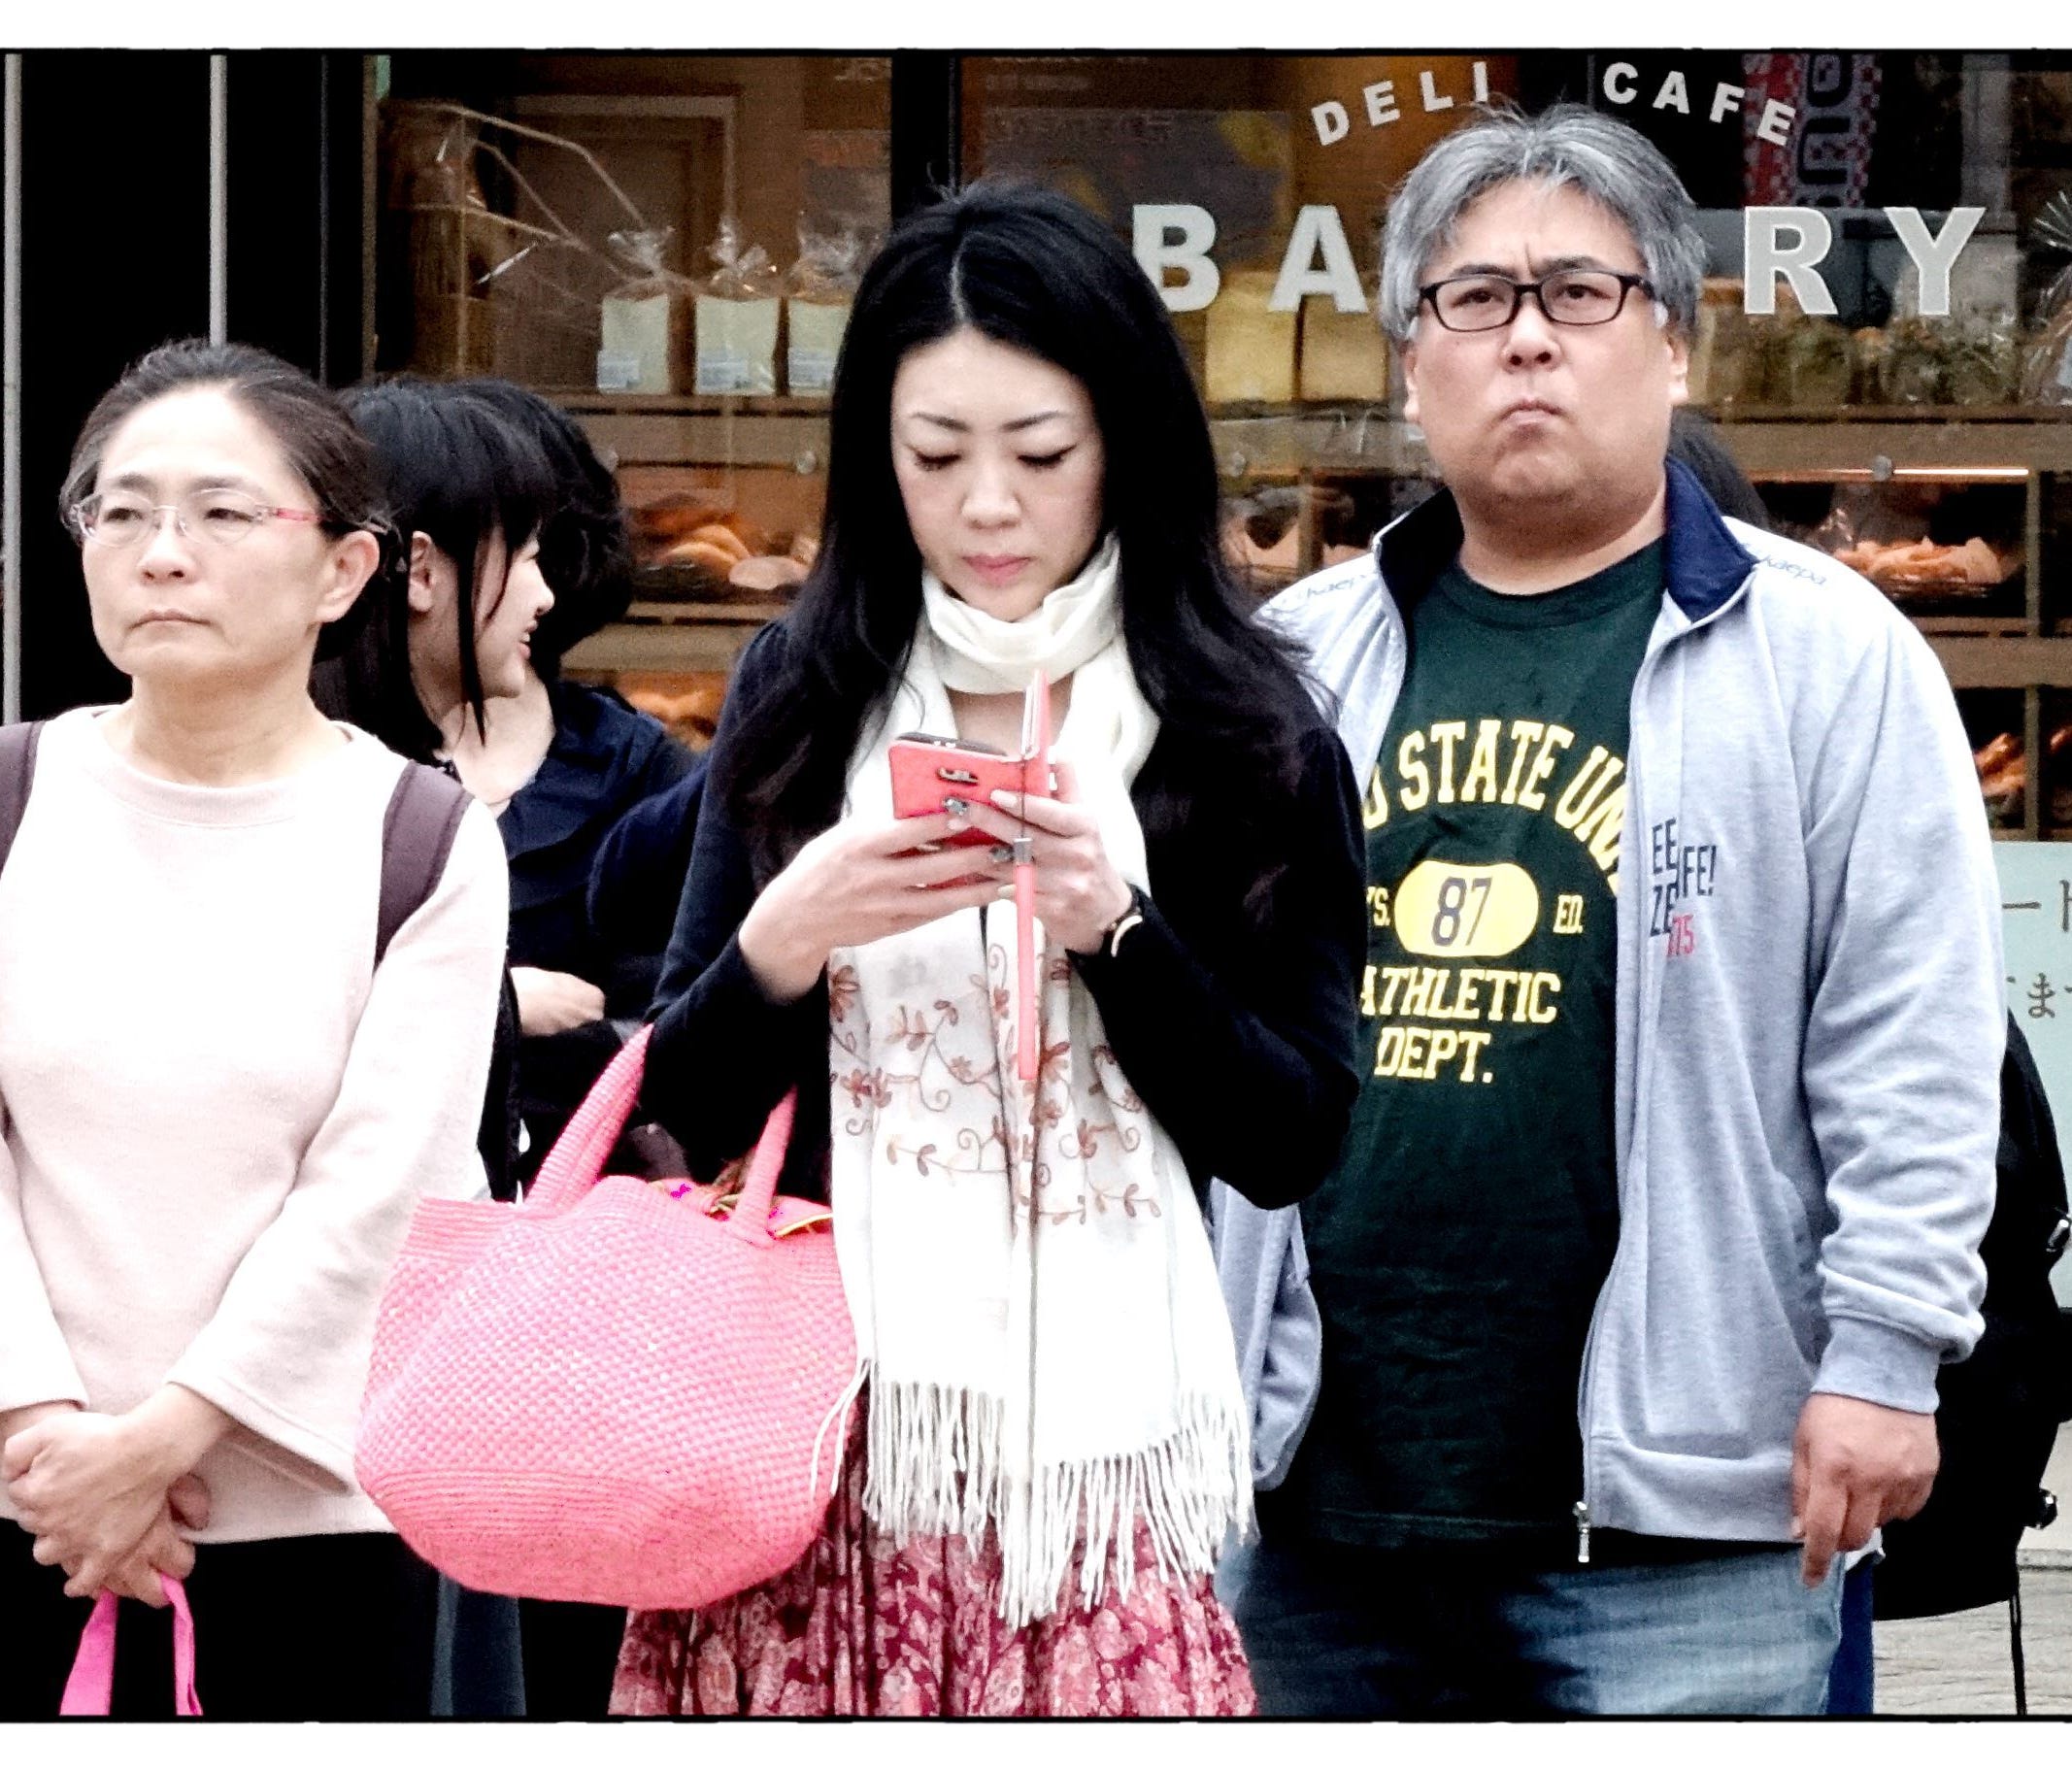 A woman checks her smartphone while walking down the street in Kobe, Japan